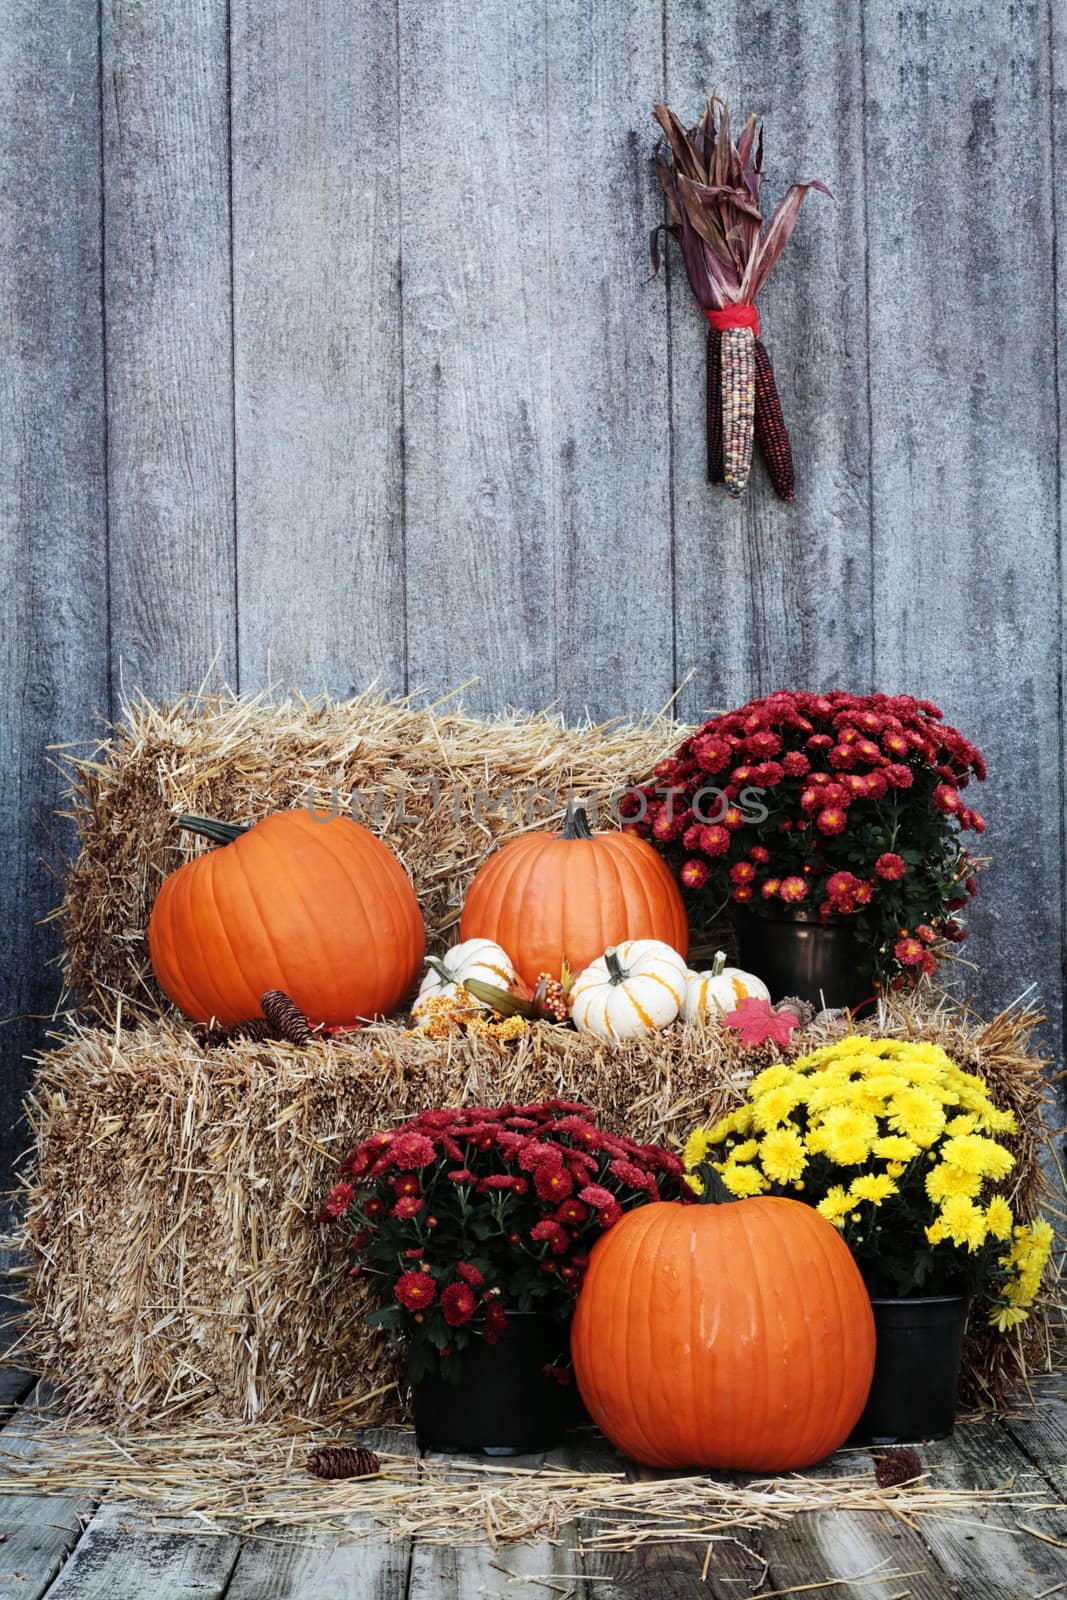 Pumpkins and Chrysanthemums on a bale of straw against a rustic background.